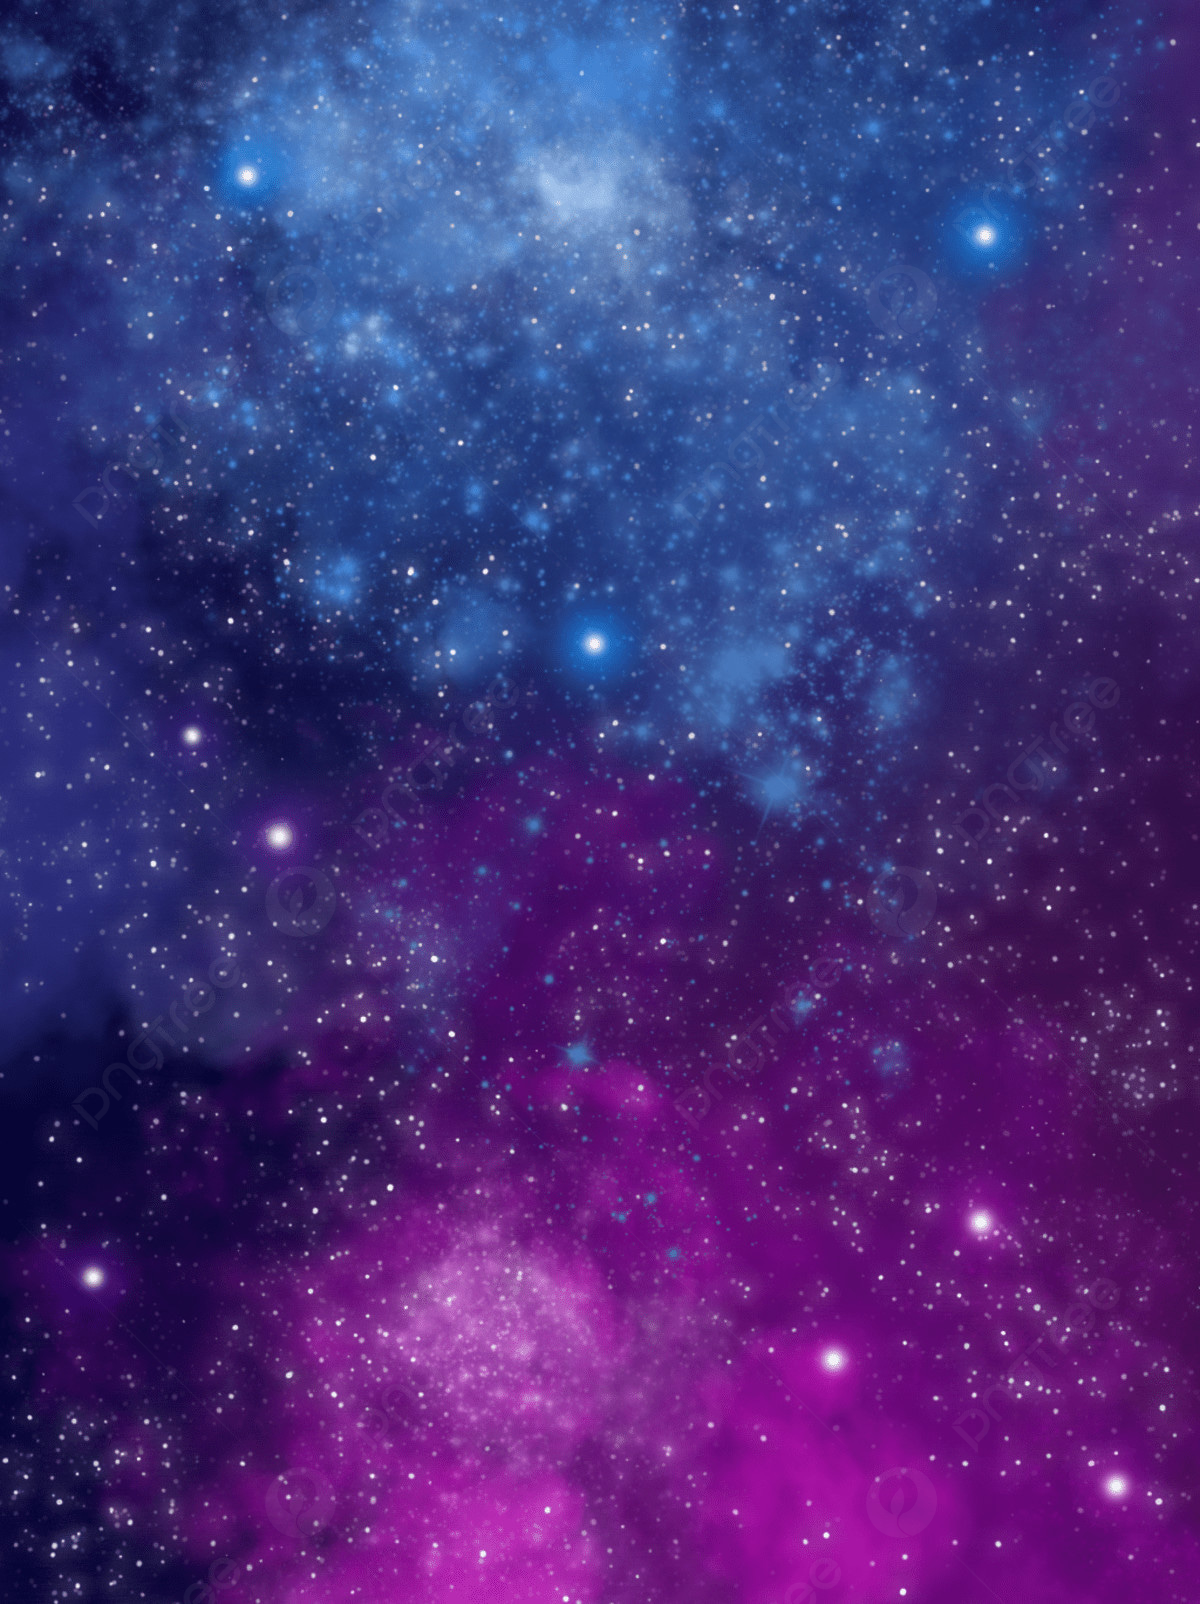 Blue purple real starry night universe galaxy background purple blue milky way background image for free download